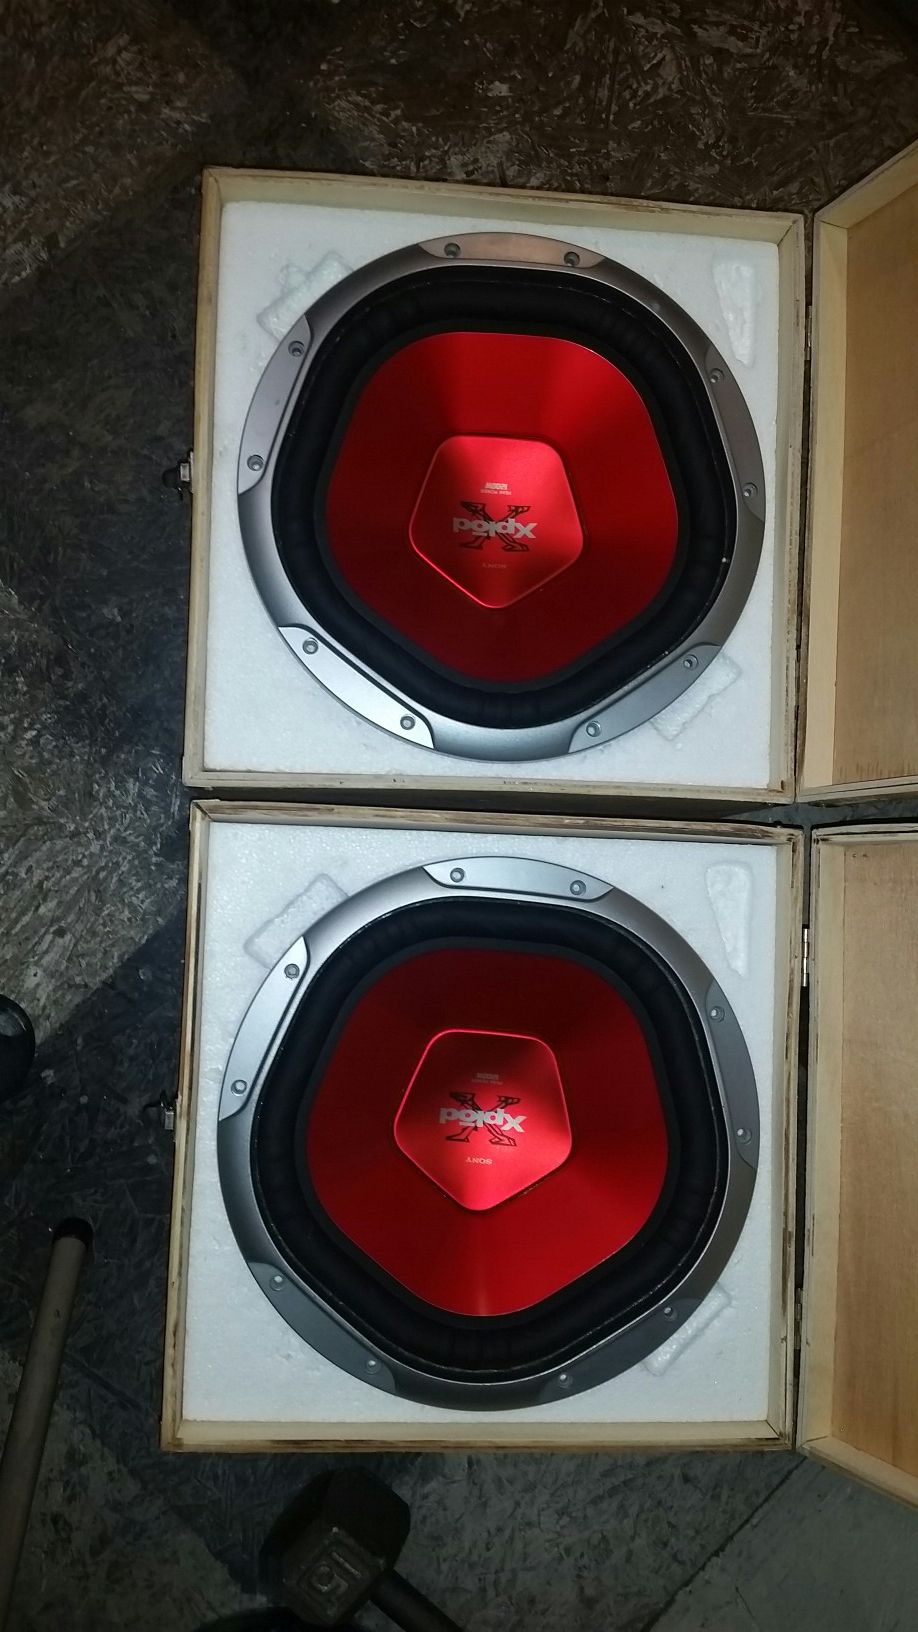 Sony explod subwoofers